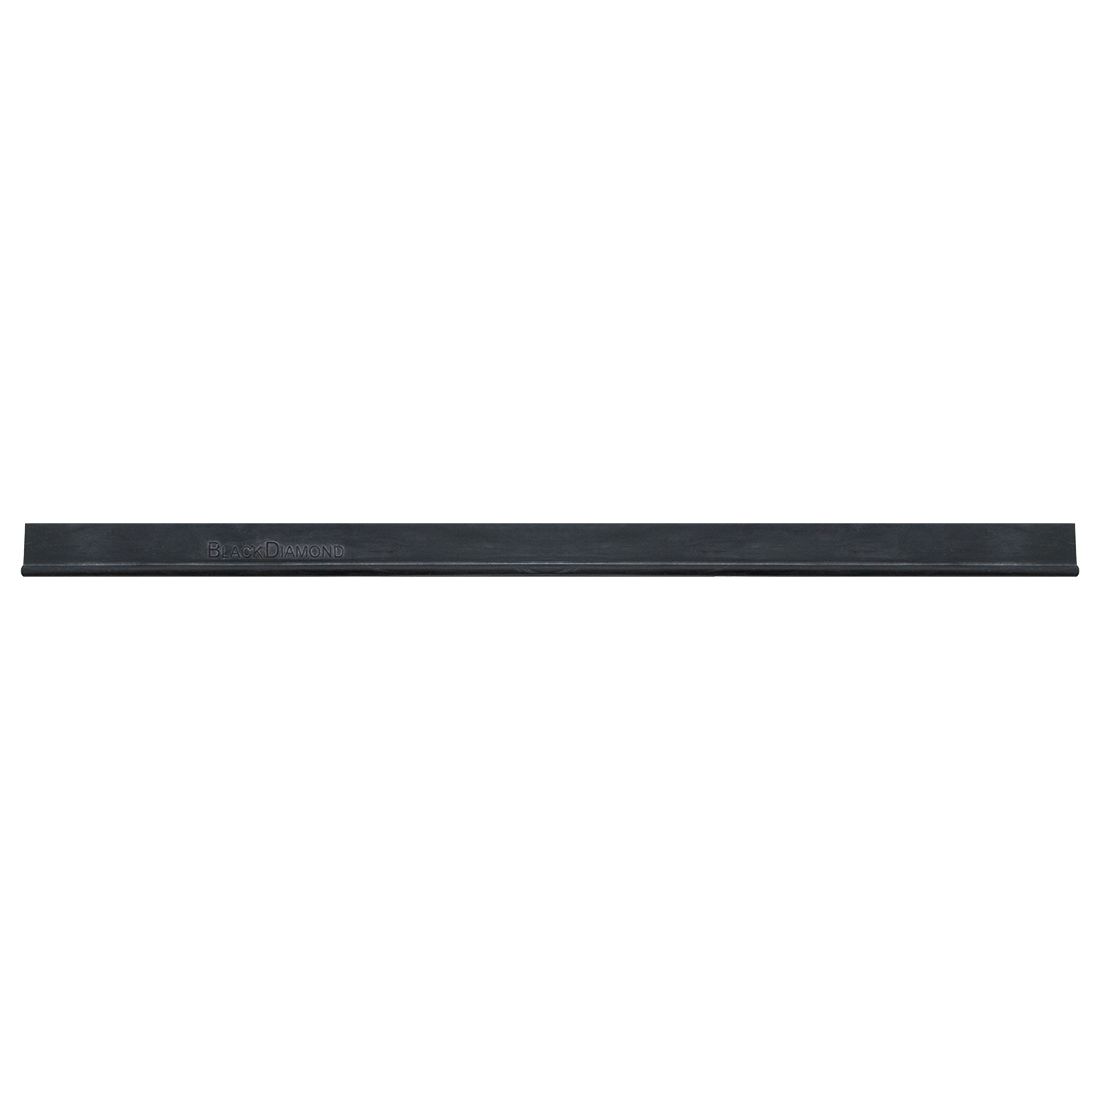 BlackDiamond Round Top Squeegee Rubber - BlackDiamond Squeegee Rubber